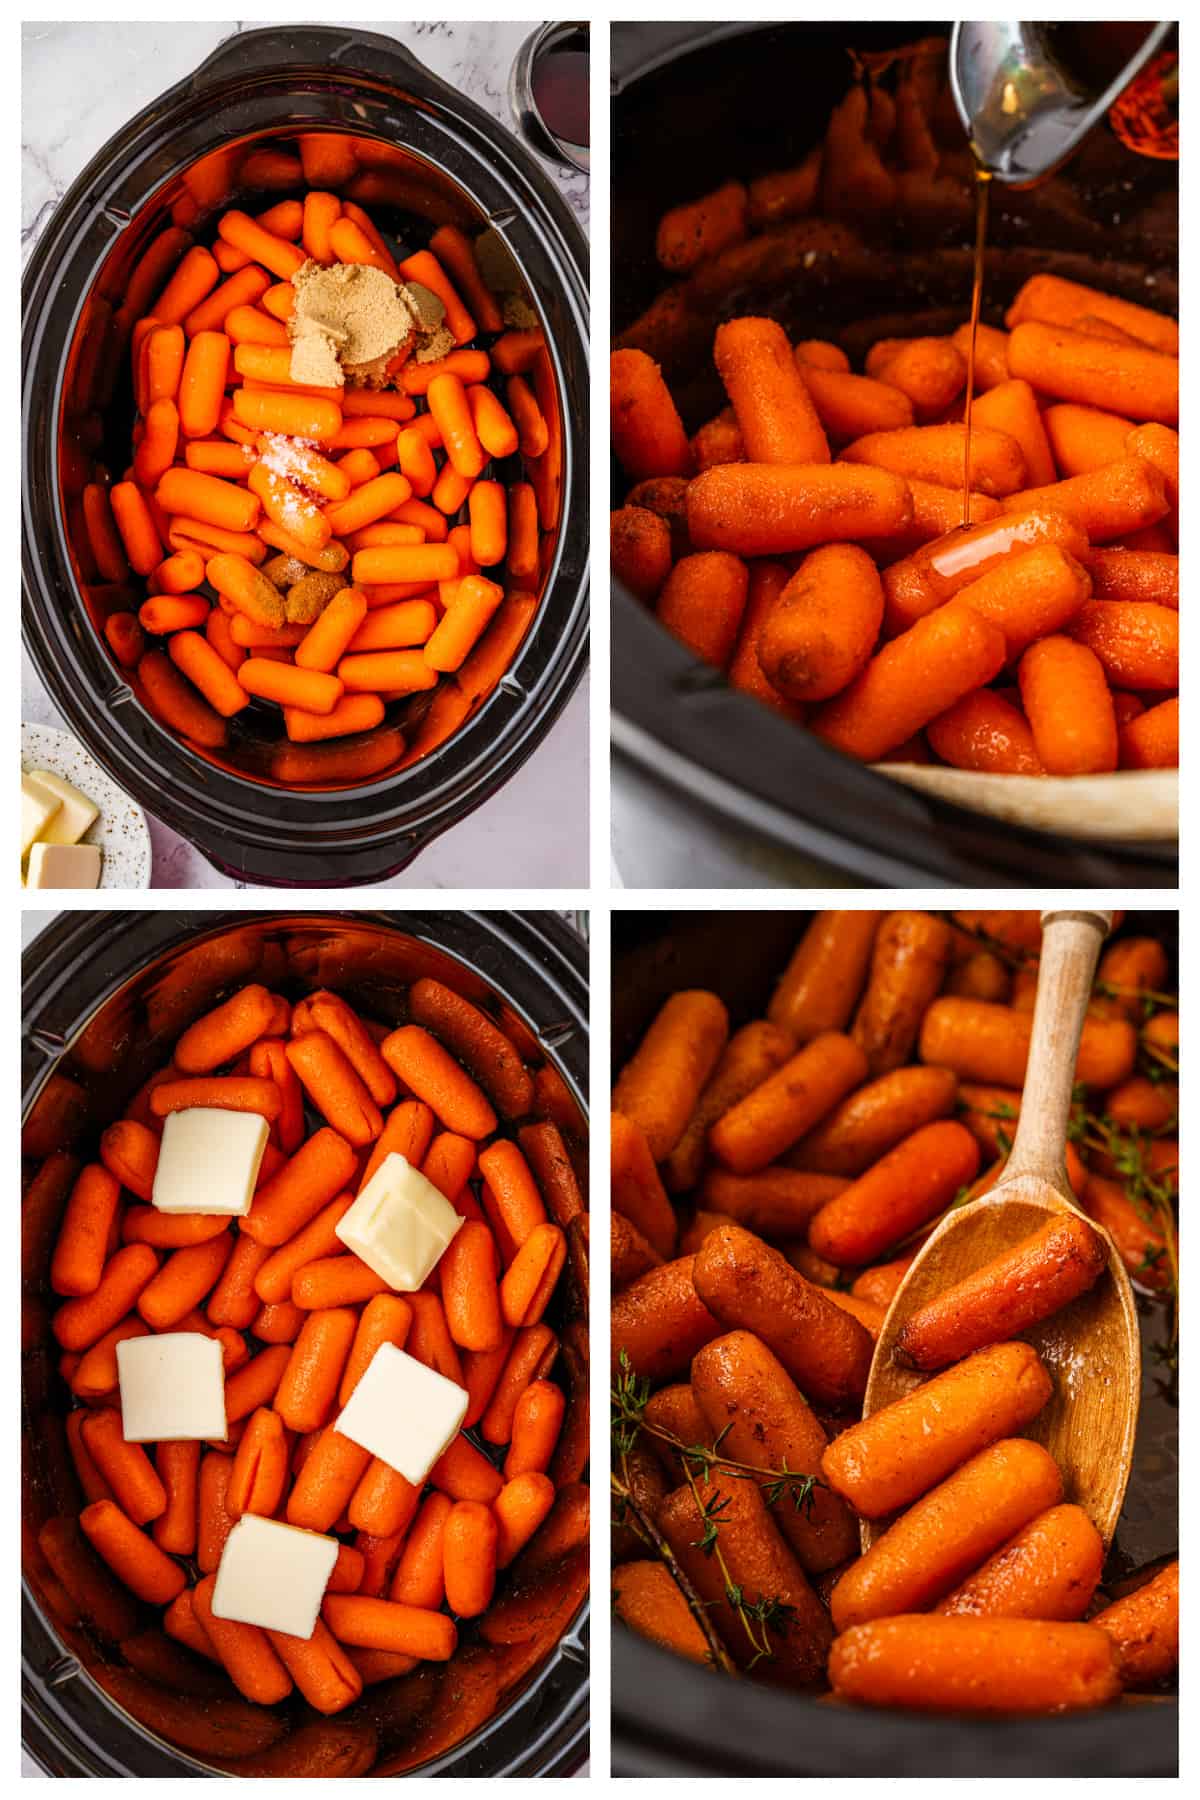 Collage showing how to make crockpot carrots.